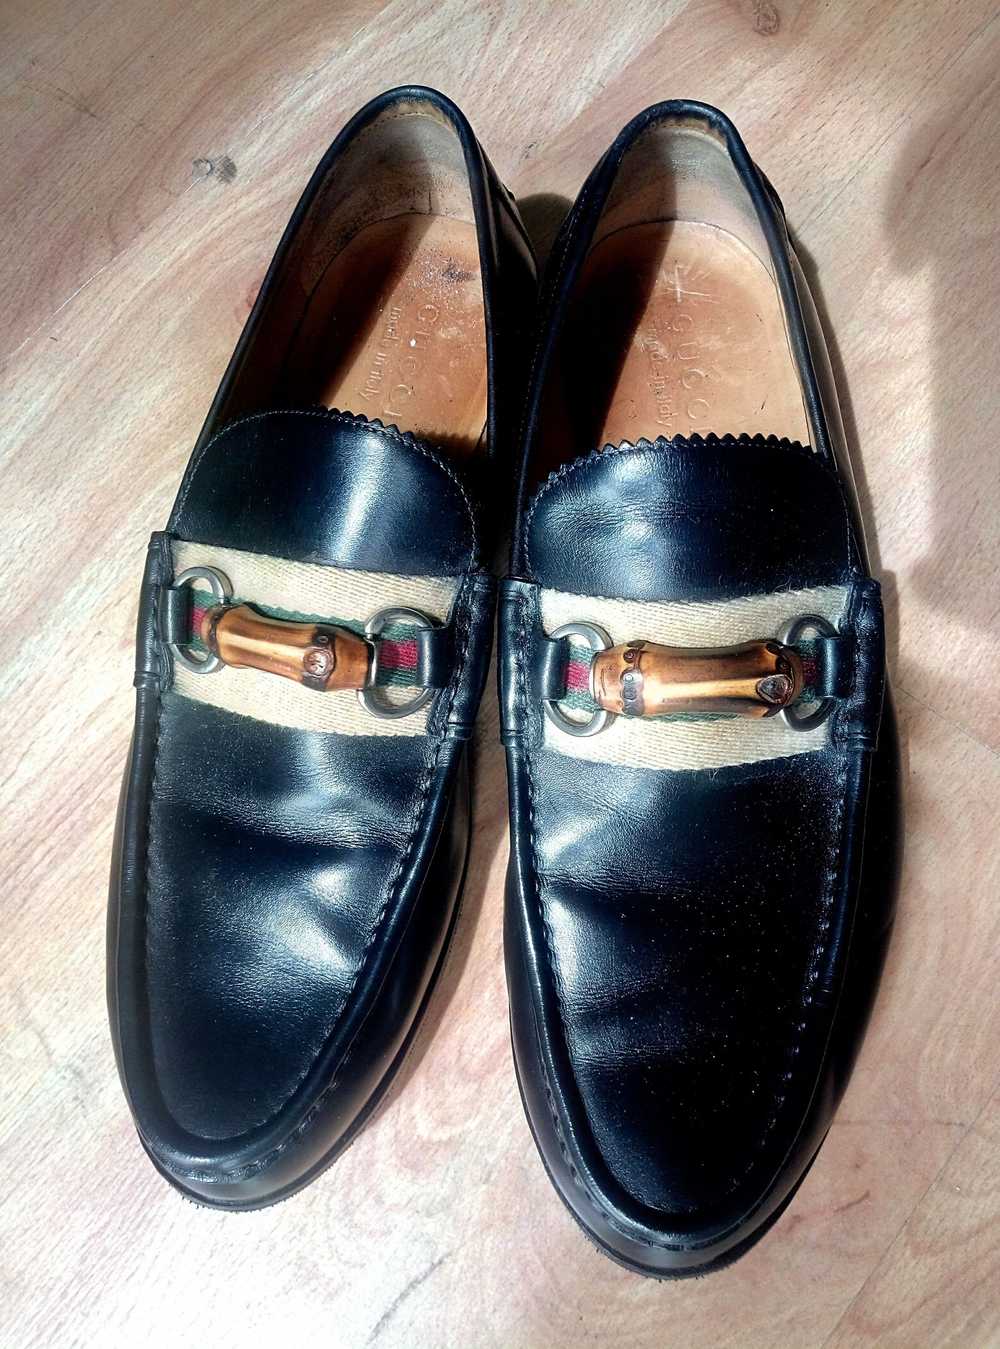 Gucci Bamboo horsebit loafers - image 1